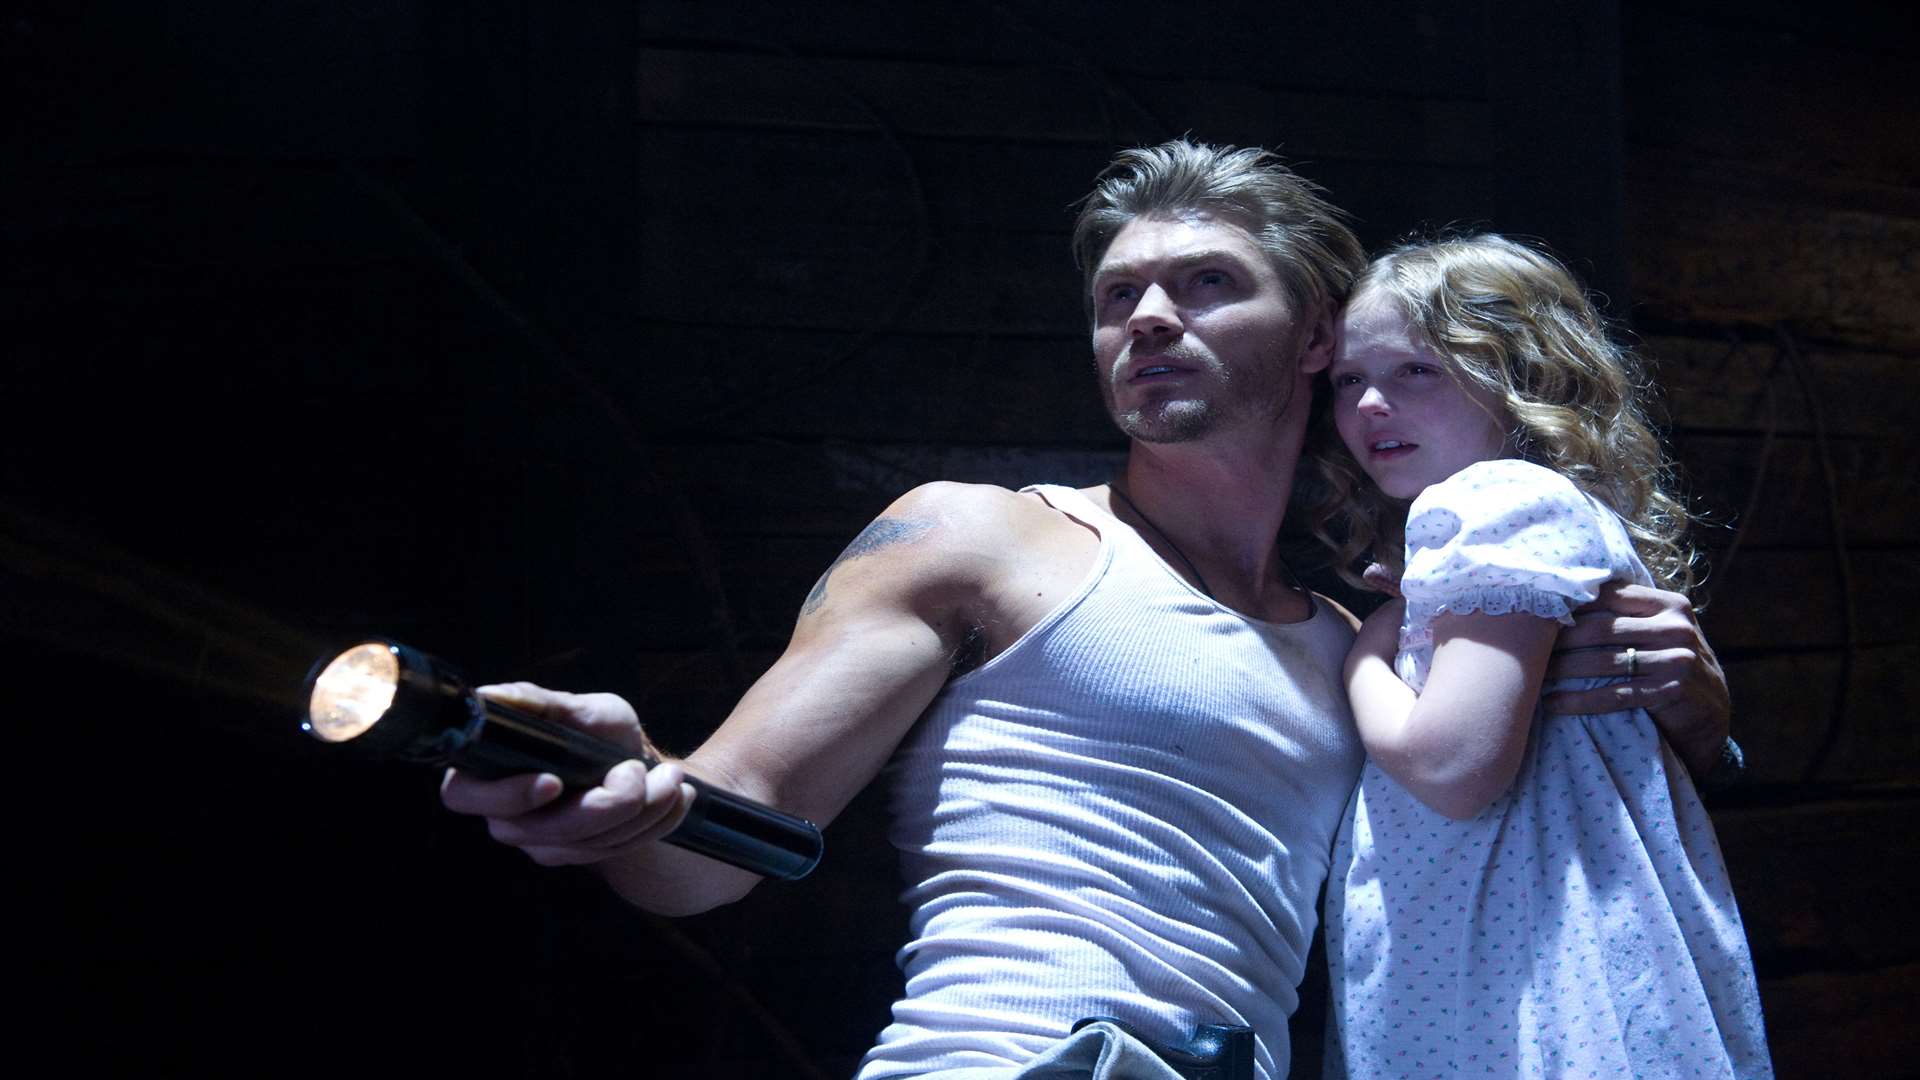 Chad Michael Murray as Andy Wyrick and Emily Alyn Lind as Heidi Wyrick, in The Haunting In Connecticut 2: Ghosts Of Georgia. Picture: PA Photo/Cook Allender/Lionsgate